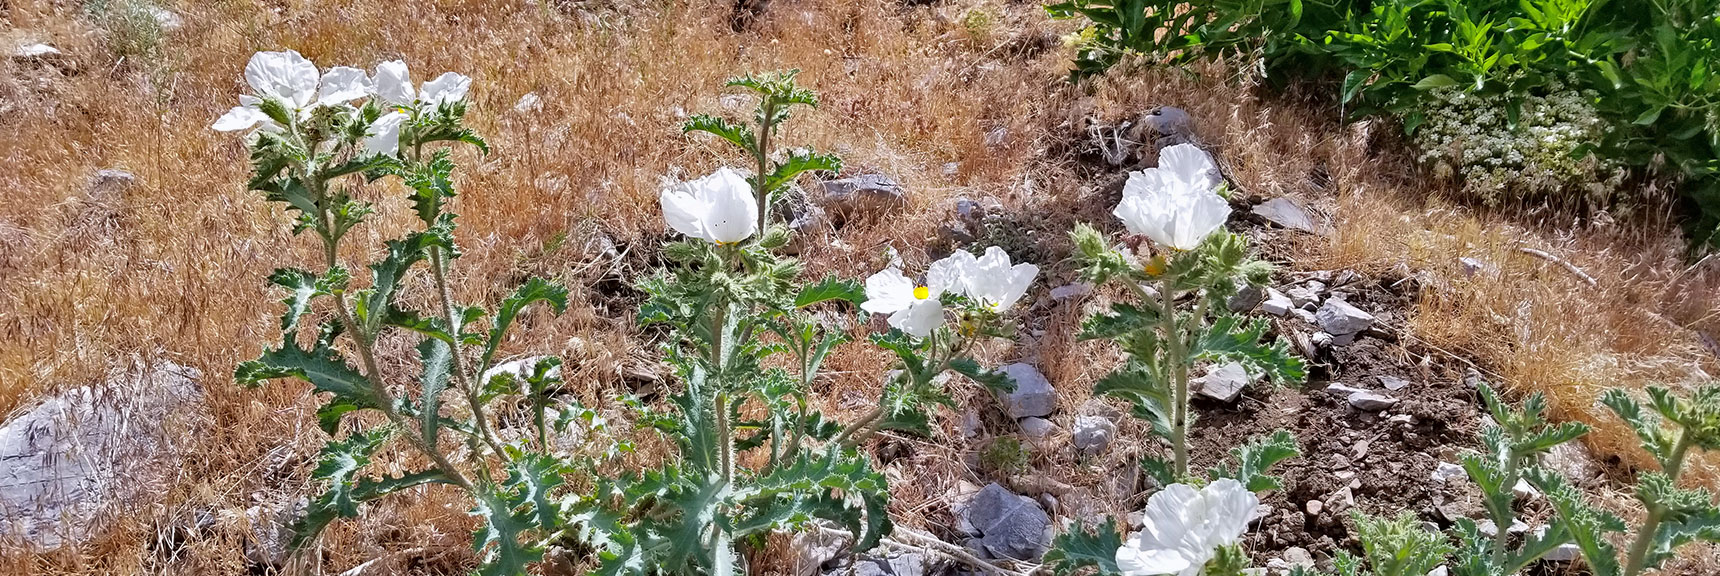 Wild Flowers on the Western Approach Ridge to Harris Mountain | Six Peak Circuit Adventure in the Spring Mountains, Nevada